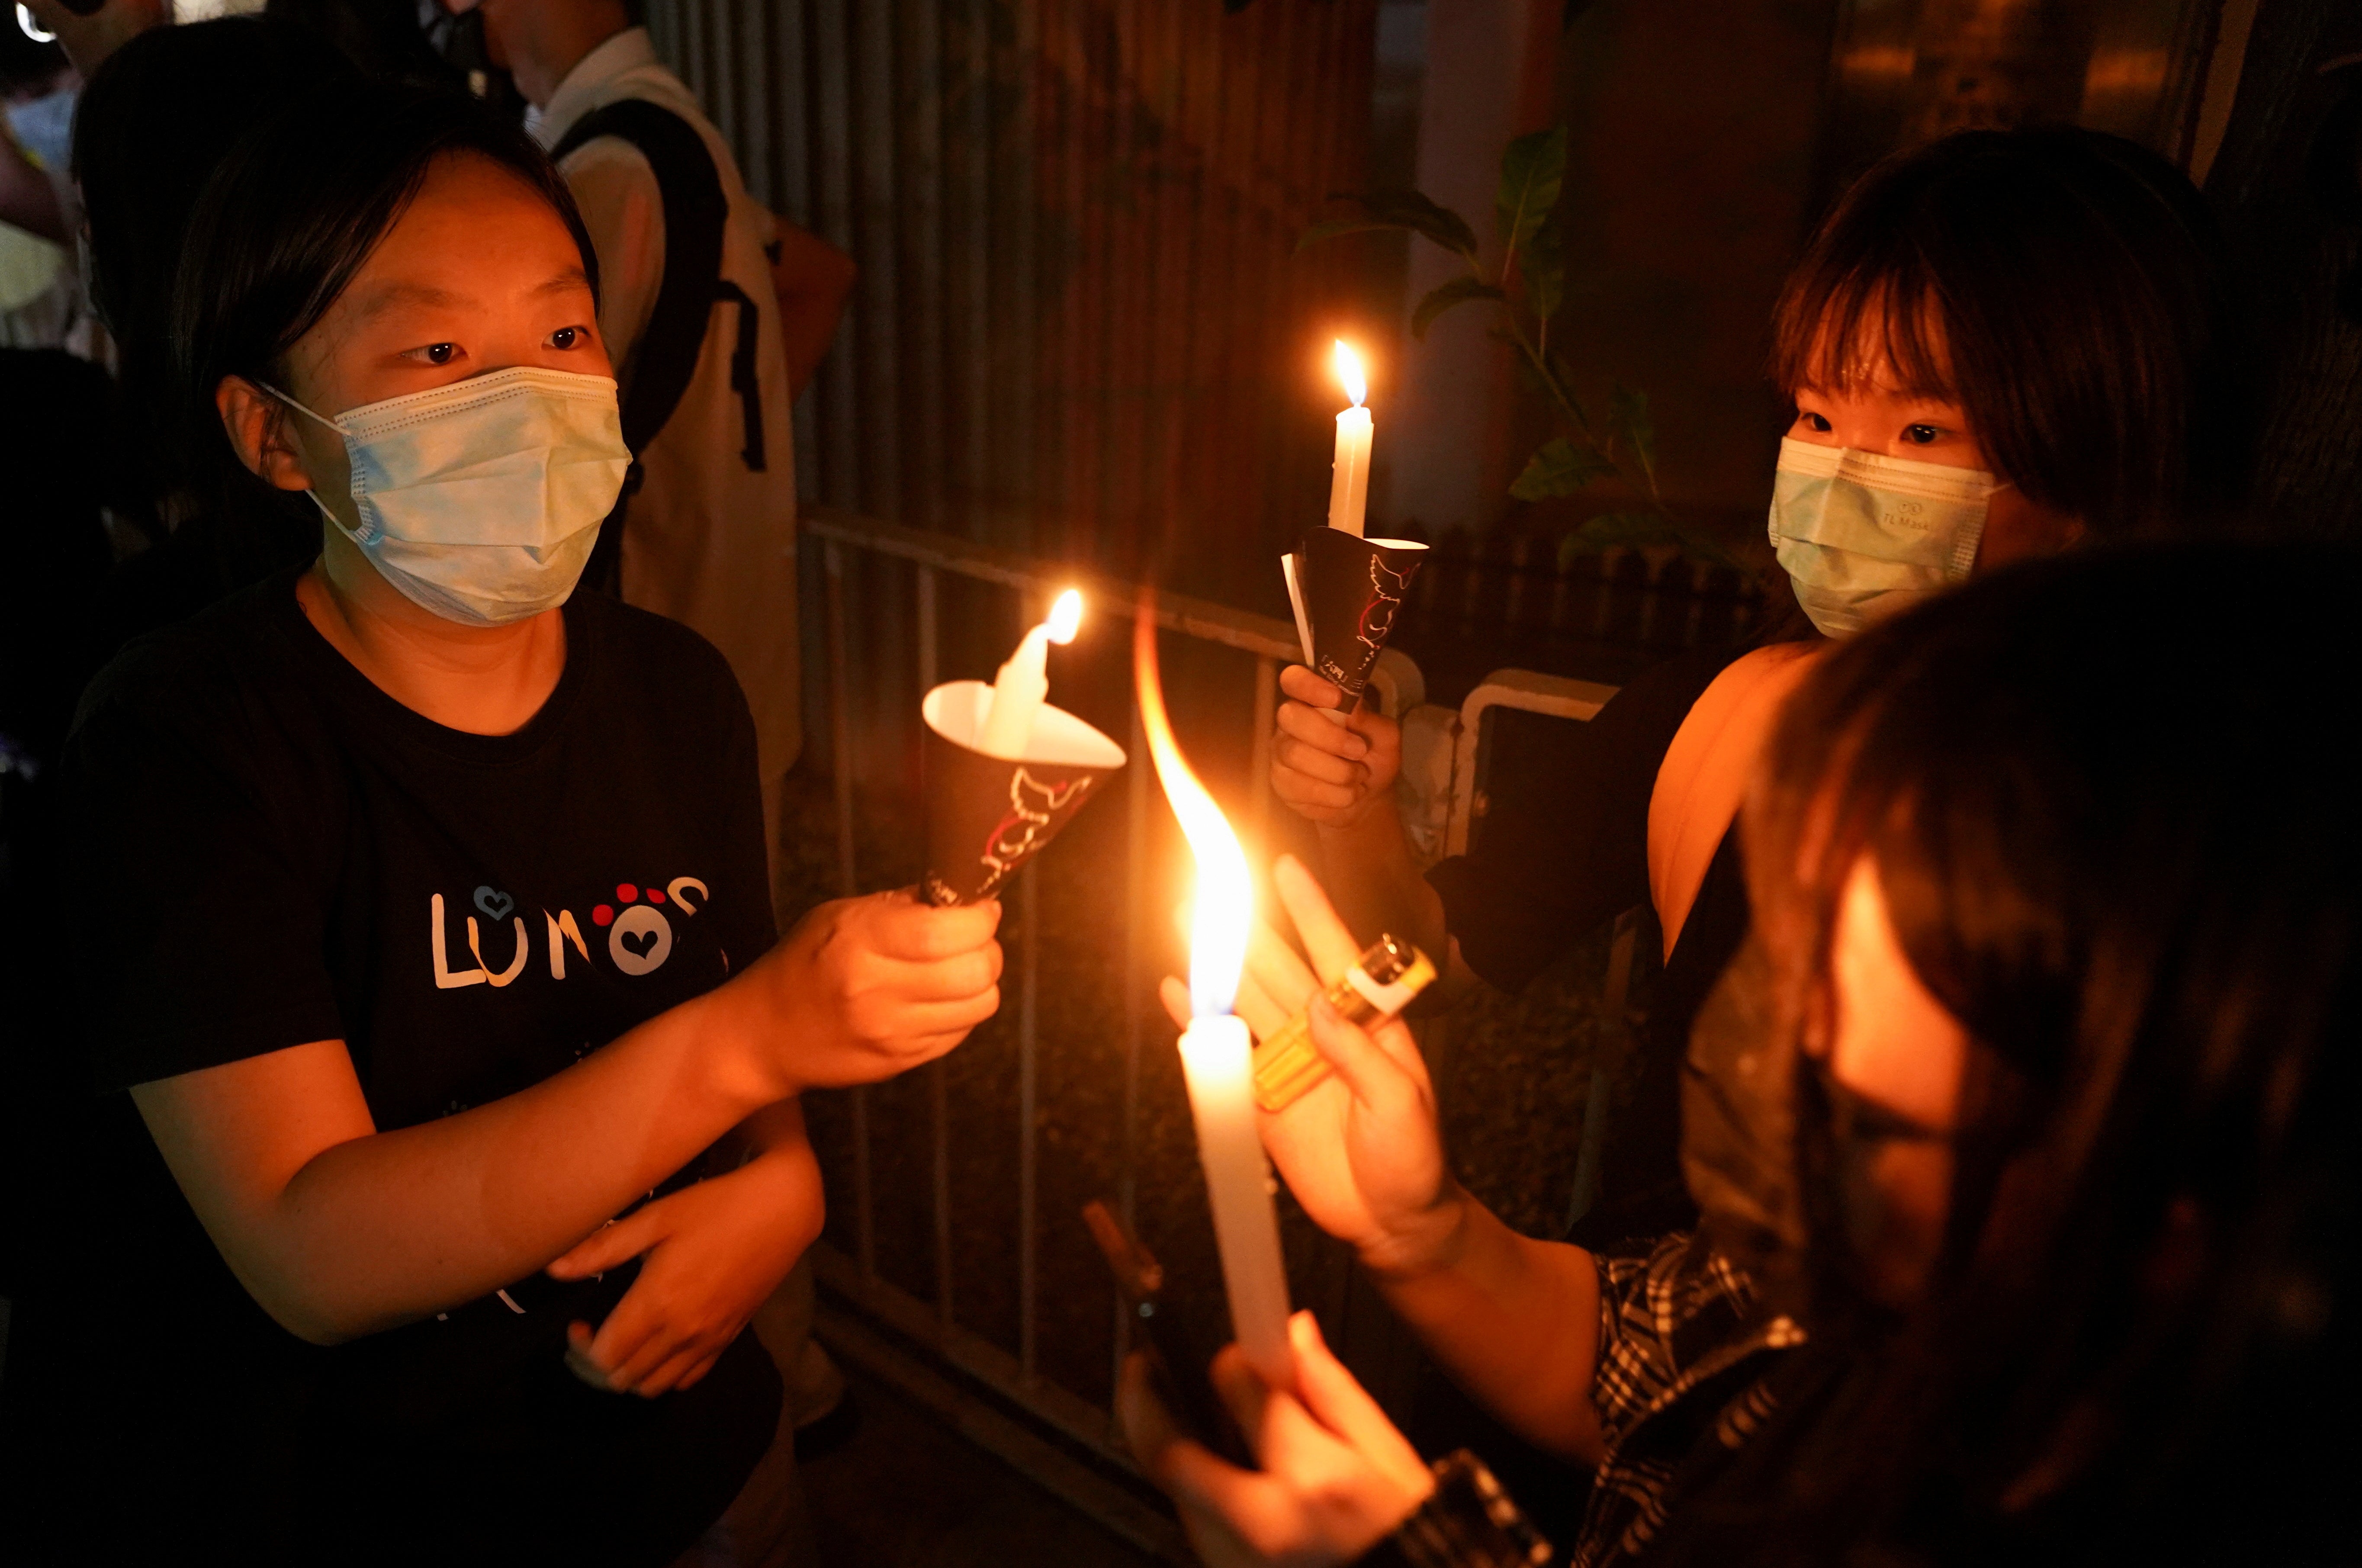 People light candles at Victoria Park on the 32nd anniversary of the crackdown on pro-democracy demonstrators at Beijing's Tiananmen Square in 1989, in Hong Kong, China 4 June 2021